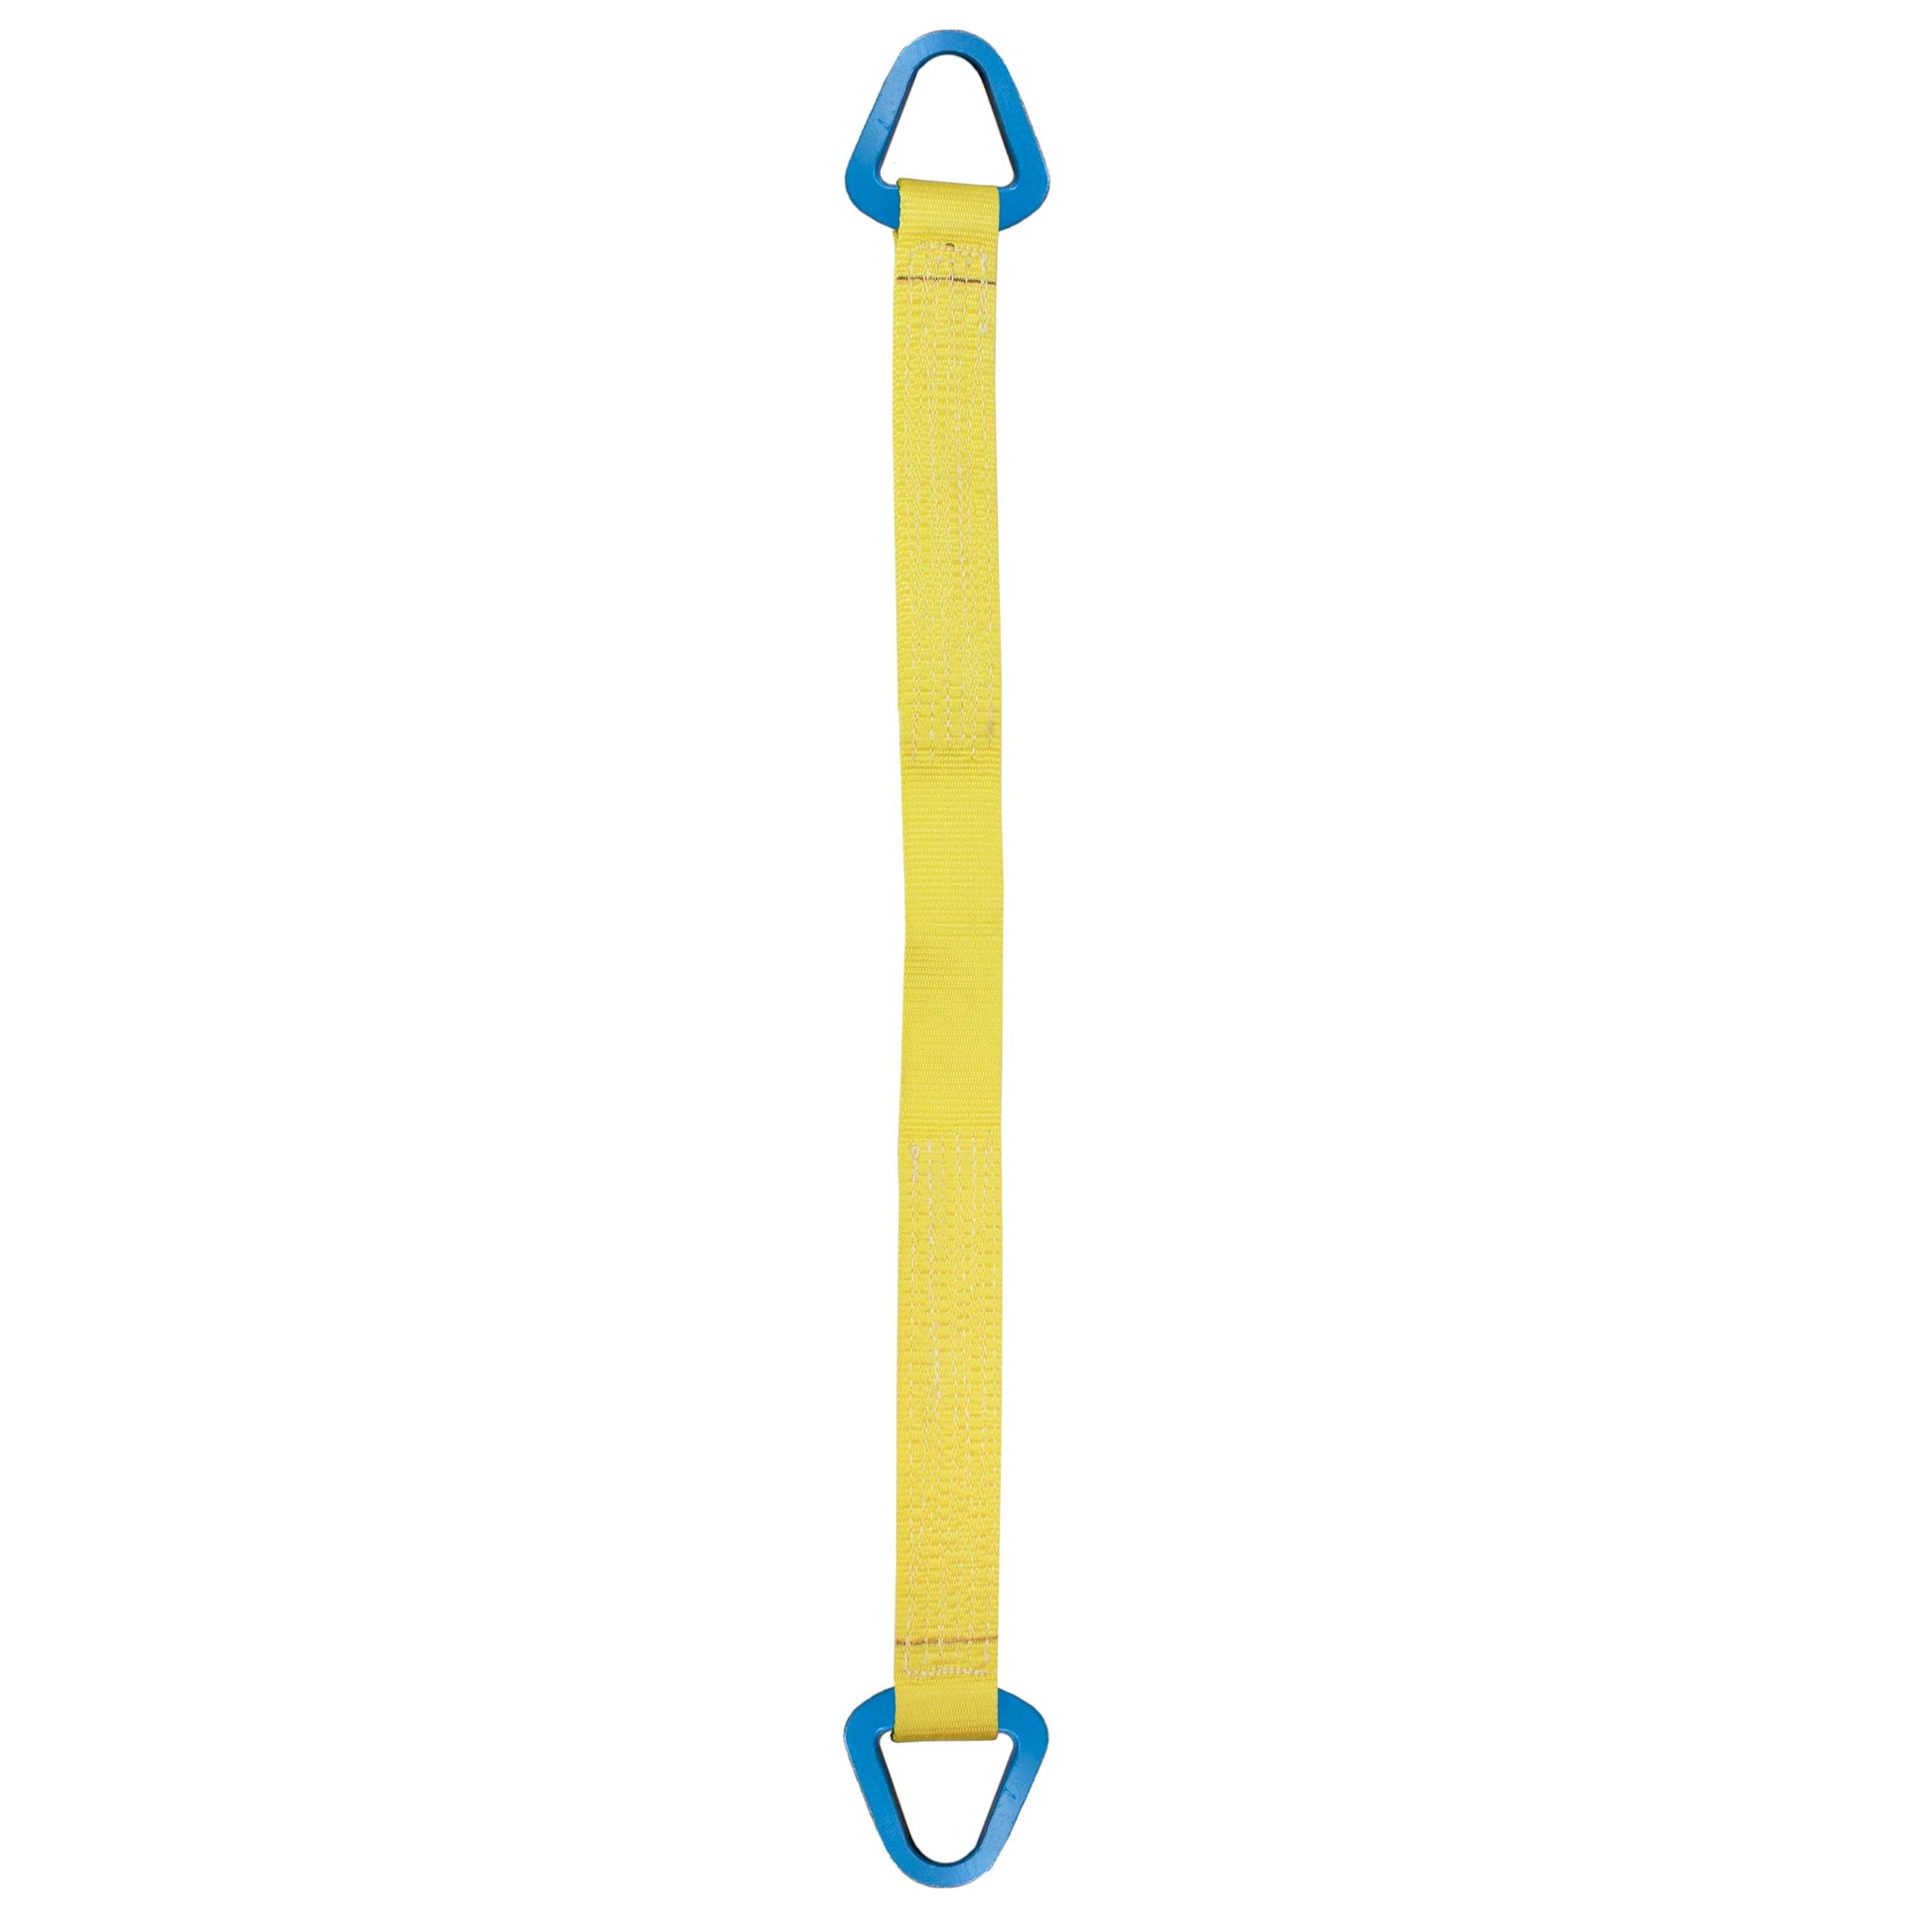 Nylon Lifting Sling Triangle 4 inch x 16 foot 1ply image 1 of 2